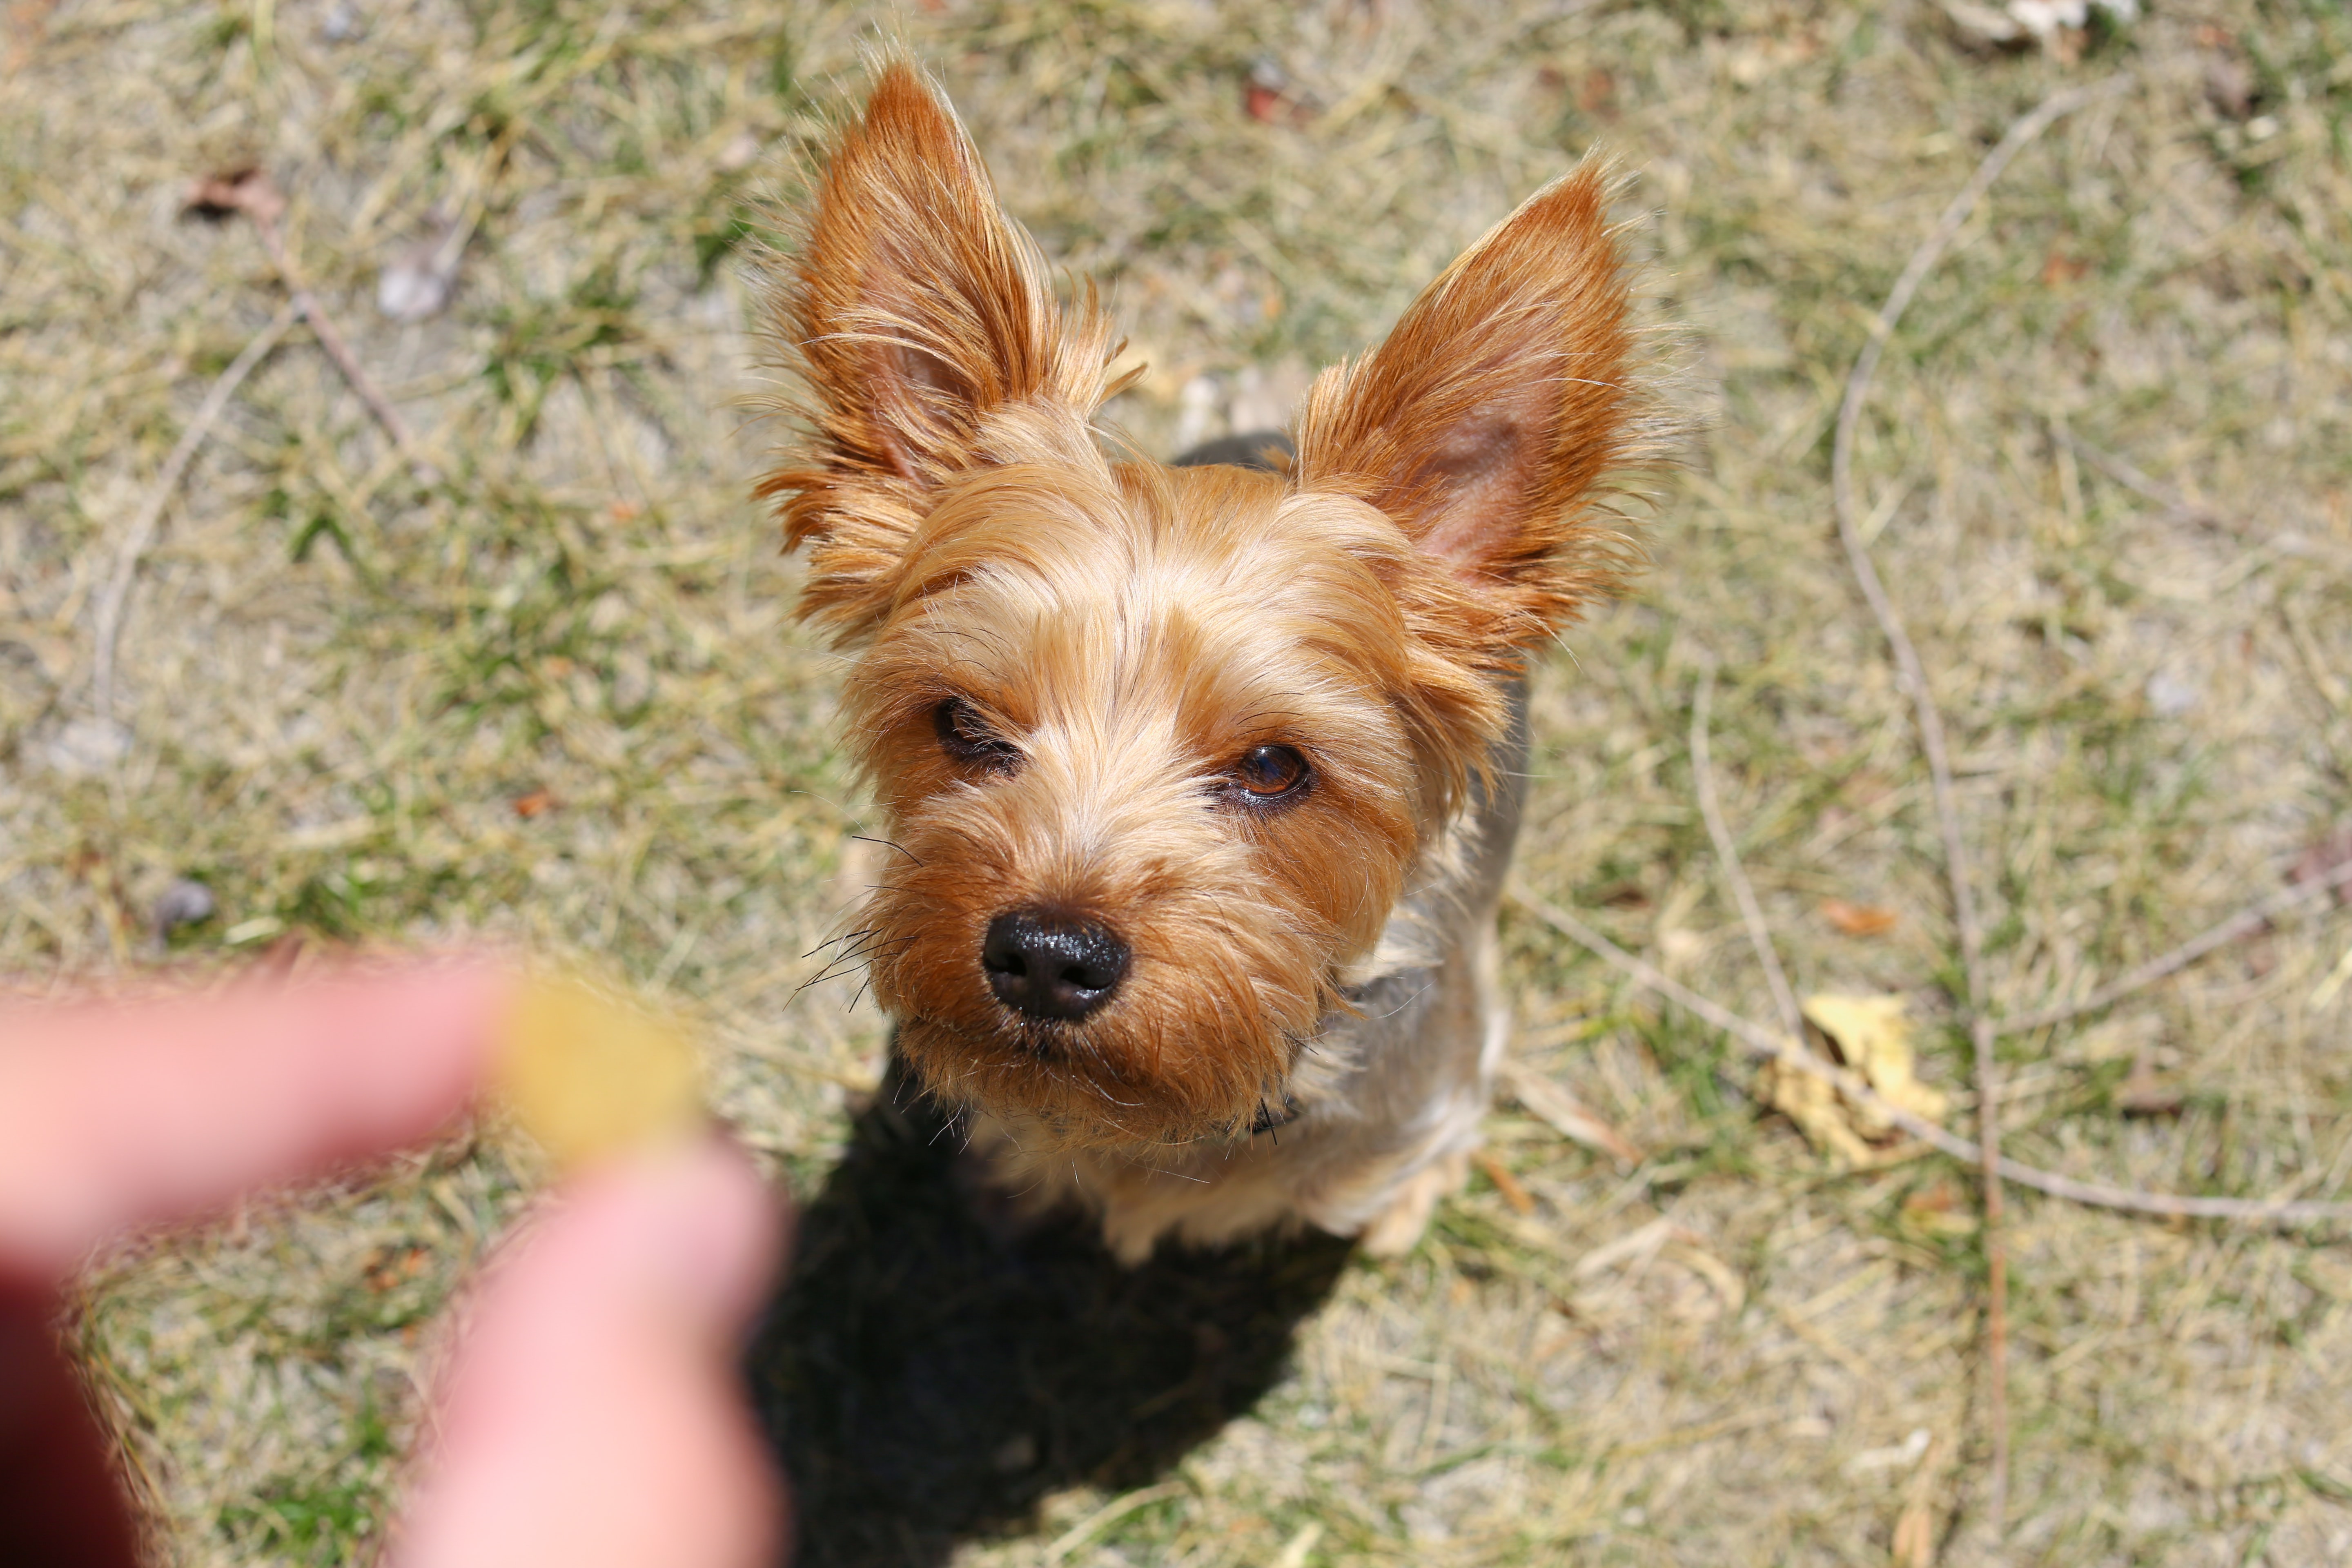 adult yorkie dog sitting on the grass looking up at a hand holding a treat